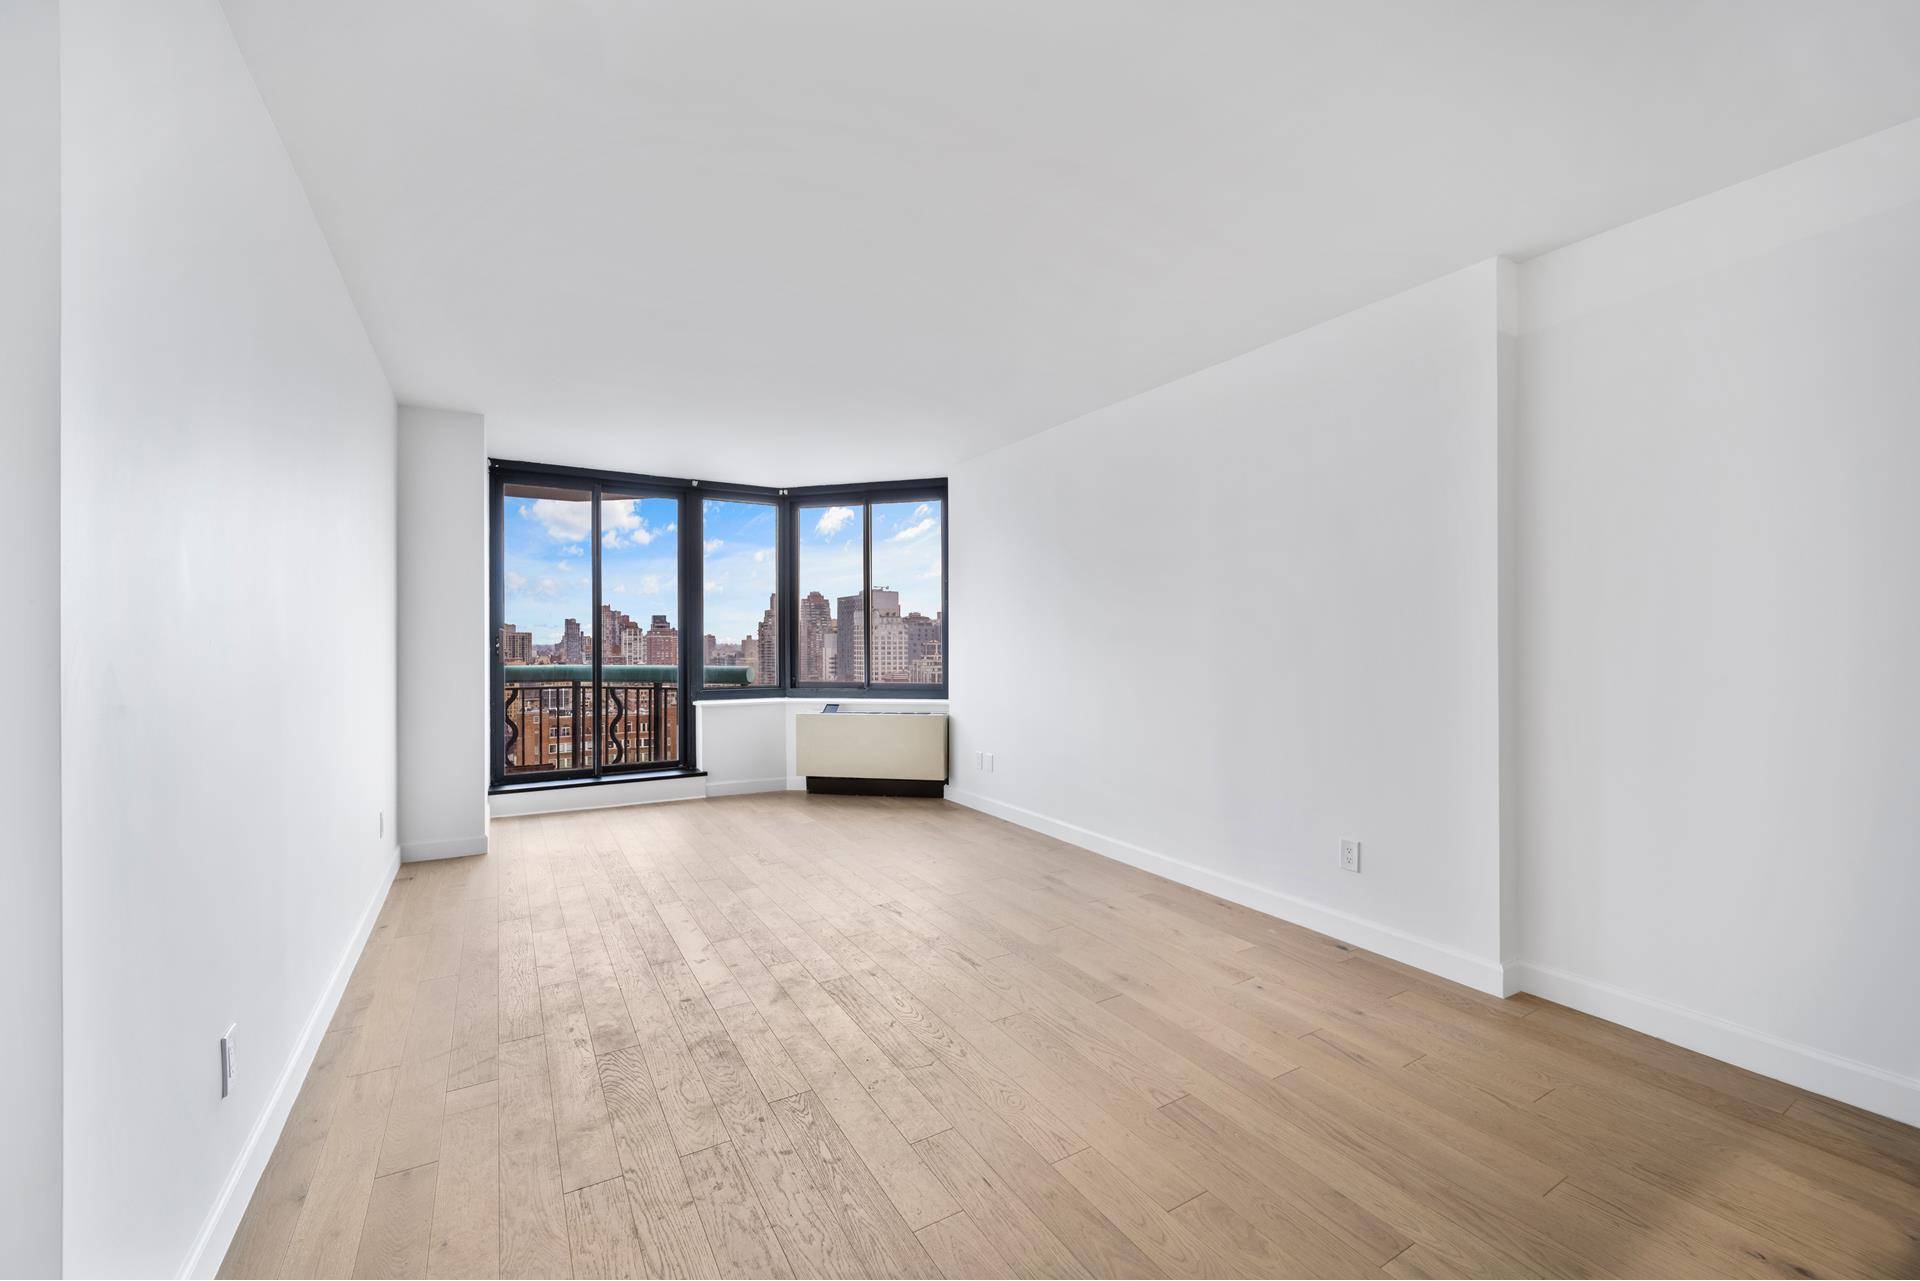 Apartment 27F offers a truly exquisite living experience in the heart of Lenox Hill.